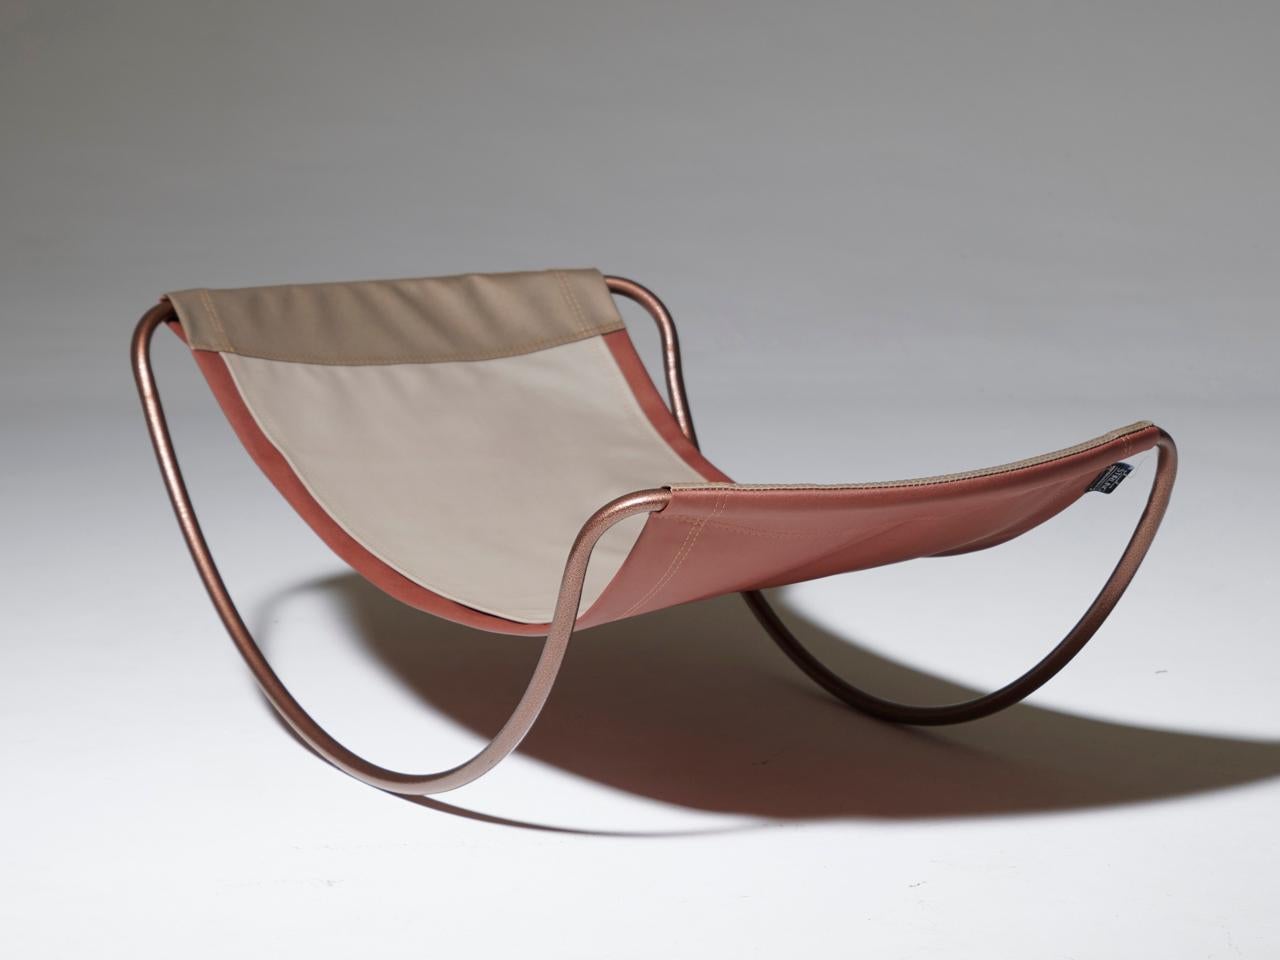 This unique Rocker is endearingly called Shay’s Chaise and seamlessly blends the charm of a rocker with the comfort of a deckchair.  
Versatile and adaptable, it's equally fitting for indoor relaxation in a living room or cozy bedroom, as well as